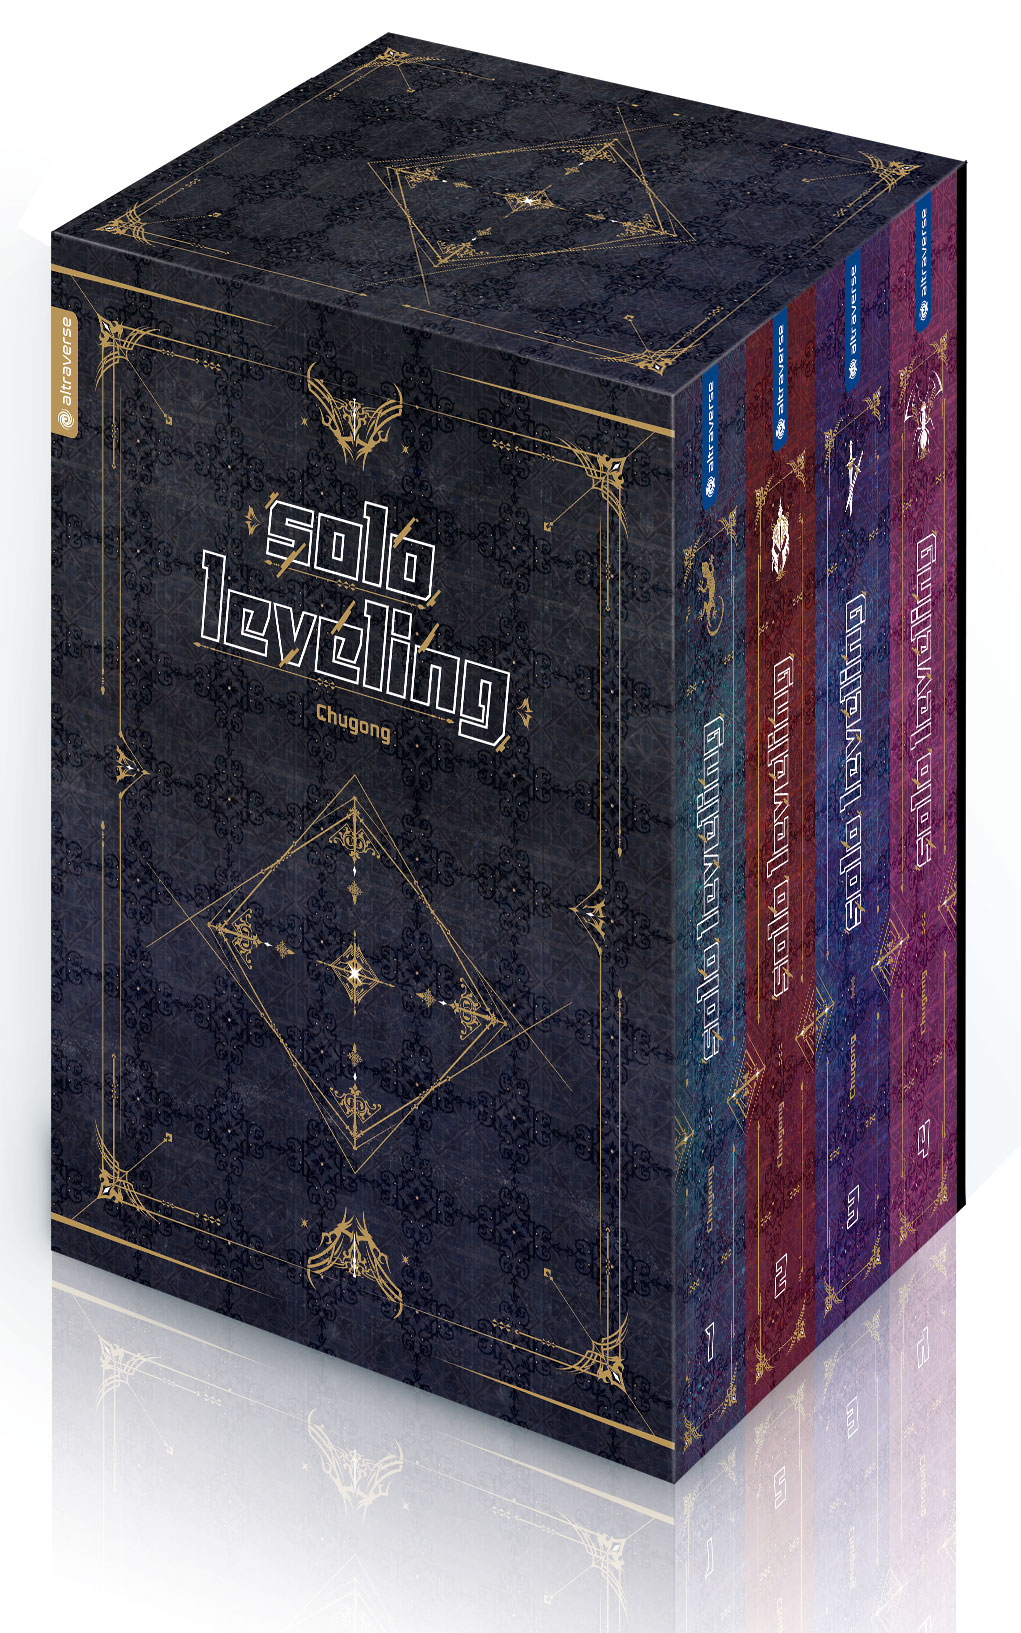 Solo Leveling (Roman) Band 1-4 ( Hardcover in Box) (Chugong)